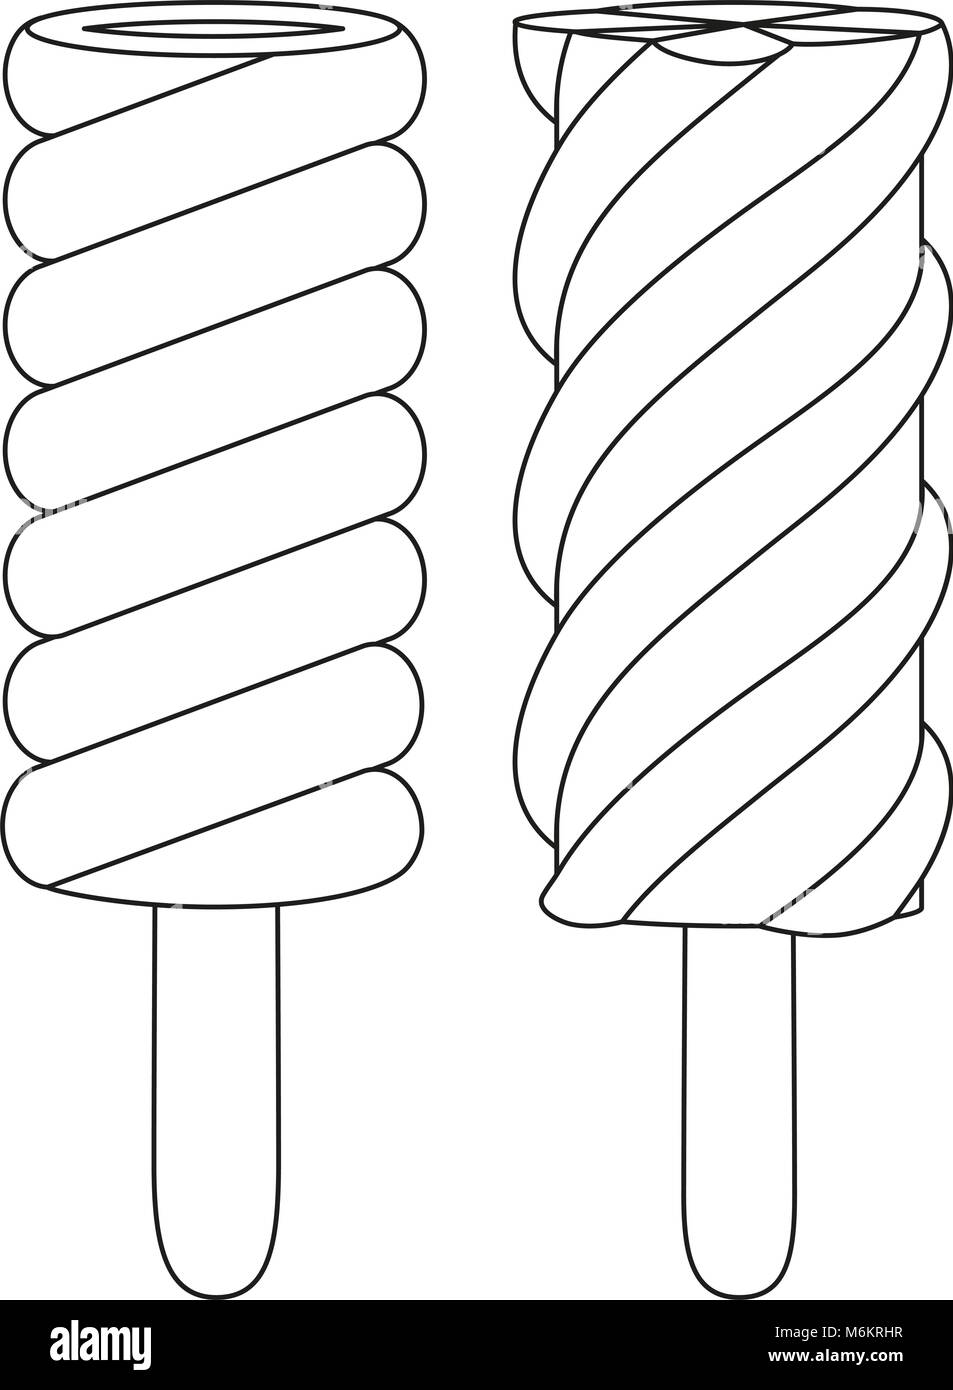 Fruit ice cream popsicle line art black and white icon set coloring book page for adults and kids summer fast food vector illustration for gift card stock vector image art